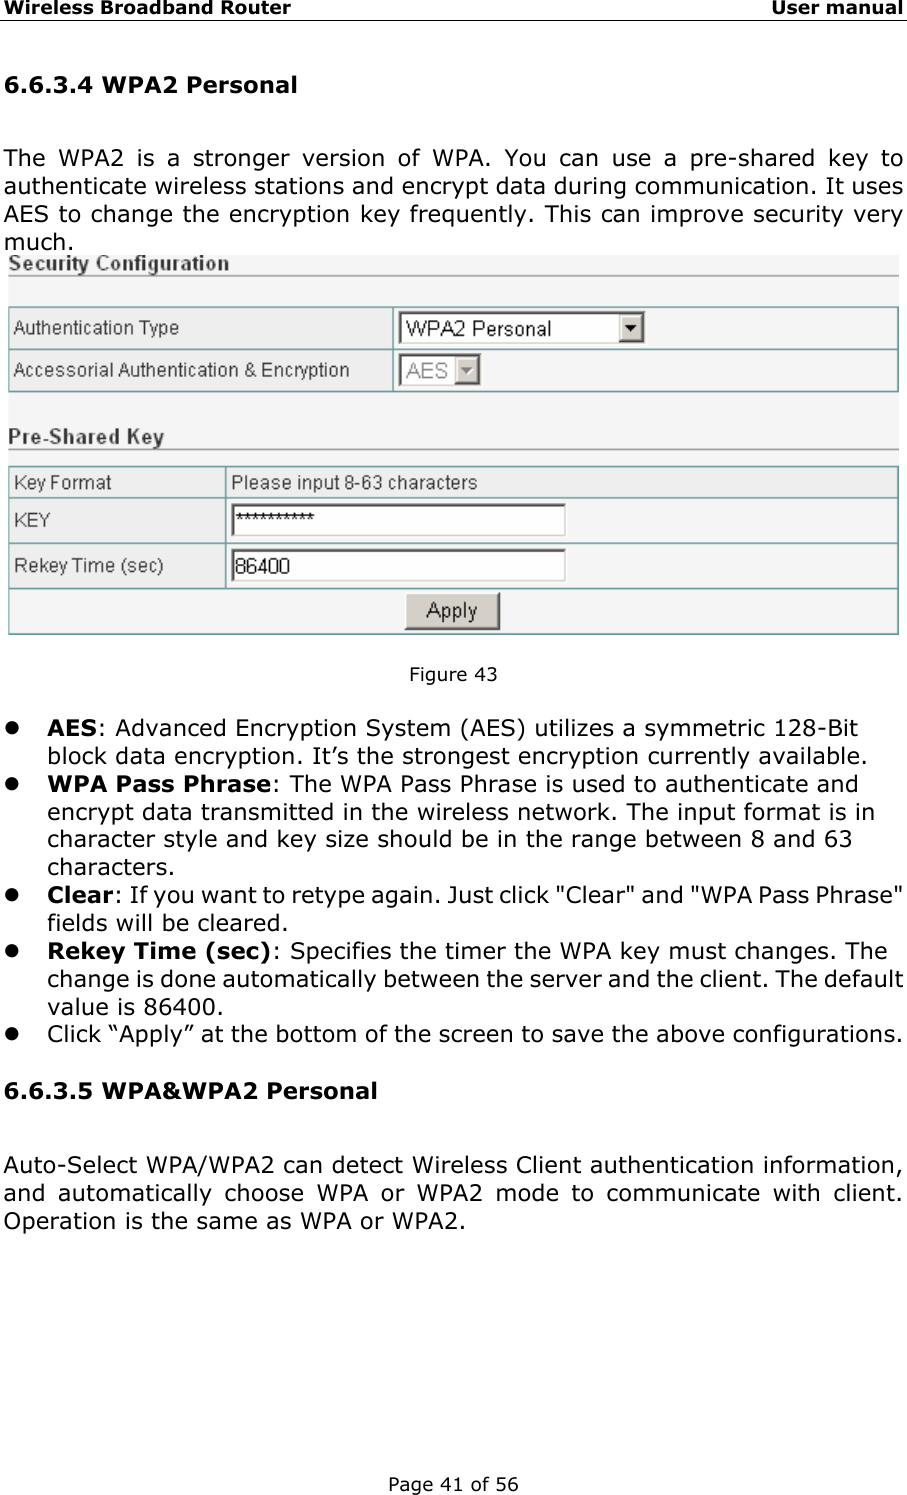 Wireless Broadband Router                                                   User manual Page 41 of 56 6.6.3.4 WPA2 Personal The WPA2 is a stronger version of WPA. You can use a pre-shared key to authenticate wireless stations and encrypt data during communication. It uses AES to change the encryption key frequently. This can improve security very much.   Figure 43  z AES: Advanced Encryption System (AES) utilizes a symmetric 128-Bit block data encryption. It’s the strongest encryption currently available. z WPA Pass Phrase: The WPA Pass Phrase is used to authenticate and encrypt data transmitted in the wireless network. The input format is in character style and key size should be in the range between 8 and 63 characters. z Clear: If you want to retype again. Just click &quot;Clear&quot; and &quot;WPA Pass Phrase&quot; fields will be cleared. z Rekey Time (sec): Specifies the timer the WPA key must changes. The change is done automatically between the server and the client. The default value is 86400. z Click “Apply” at the bottom of the screen to save the above configurations. 6.6.3.5 WPA&amp;WPA2 Personal Auto-Select WPA/WPA2 can detect Wireless Client authentication information, and automatically choose WPA or WPA2 mode to communicate with client. Operation is the same as WPA or WPA2. 